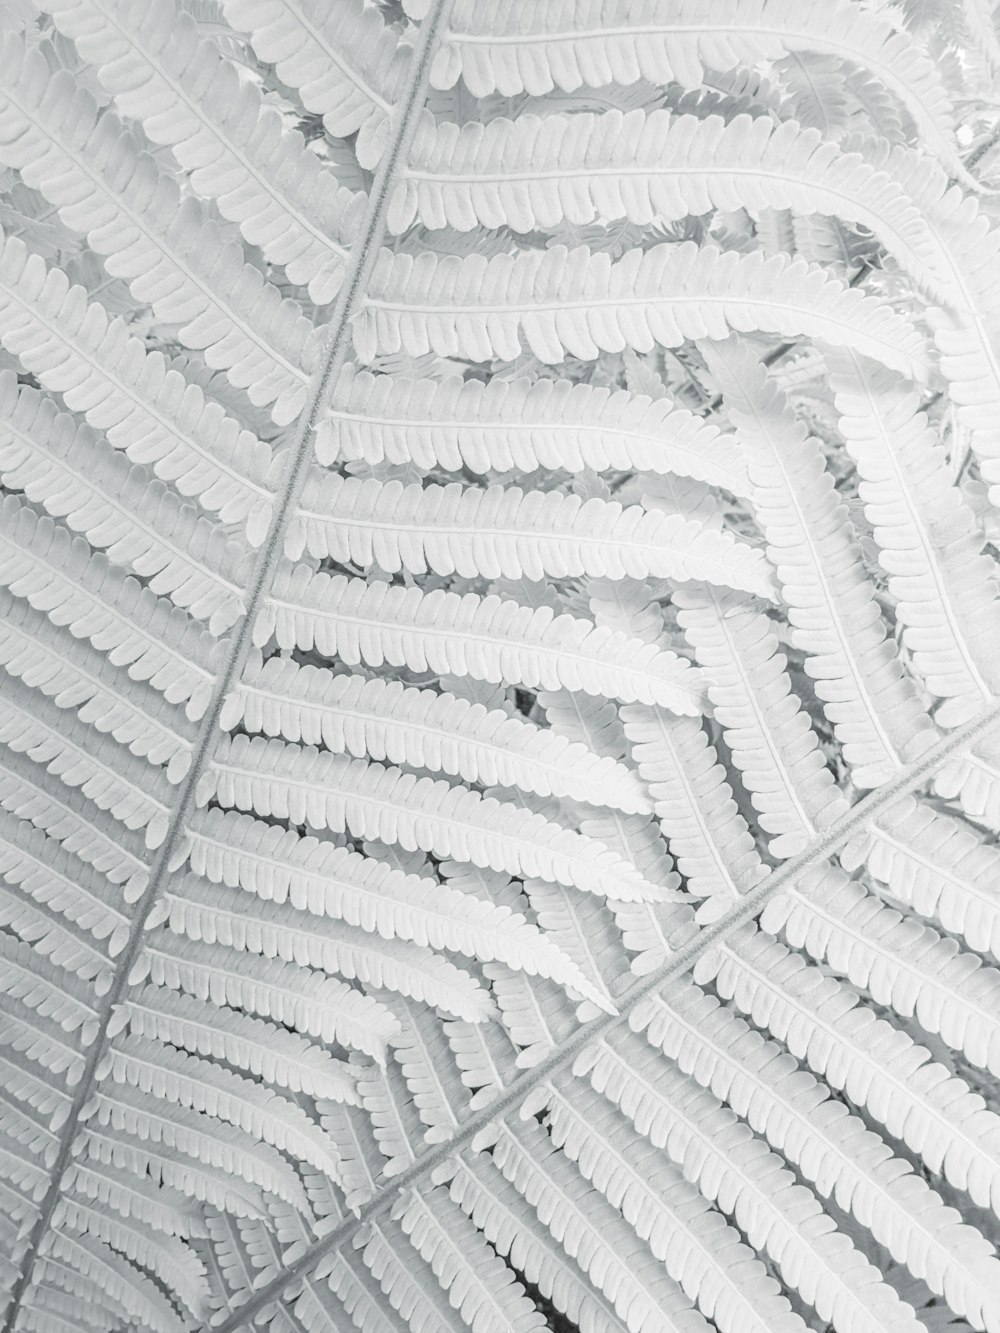 a close up view of a white leaf